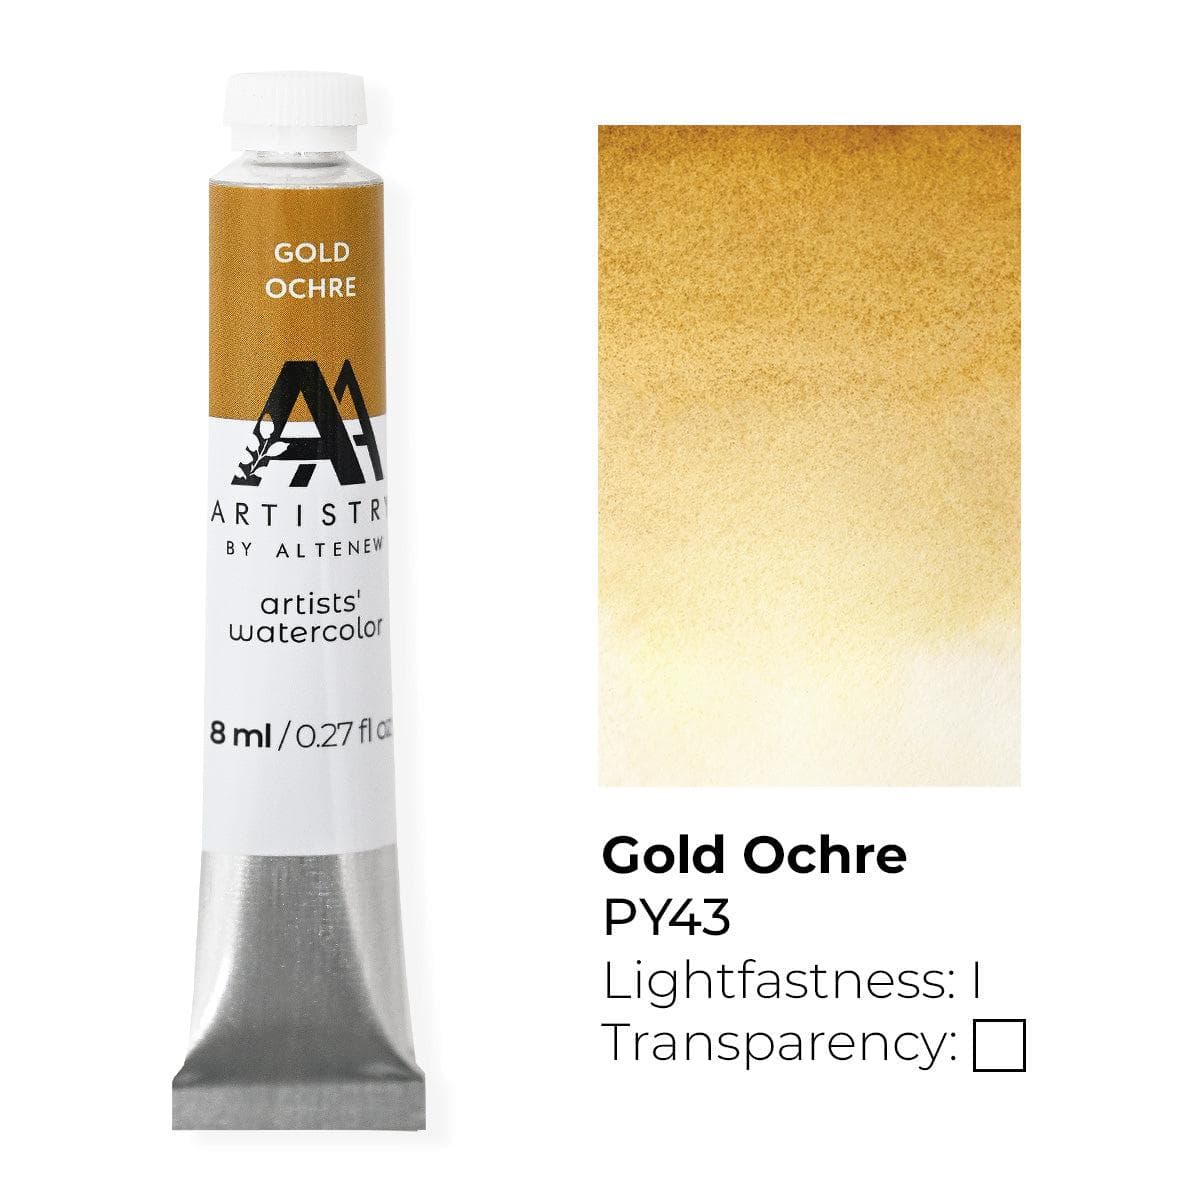 Watercolor Artists' Watercolor Tube - Gold Ochre